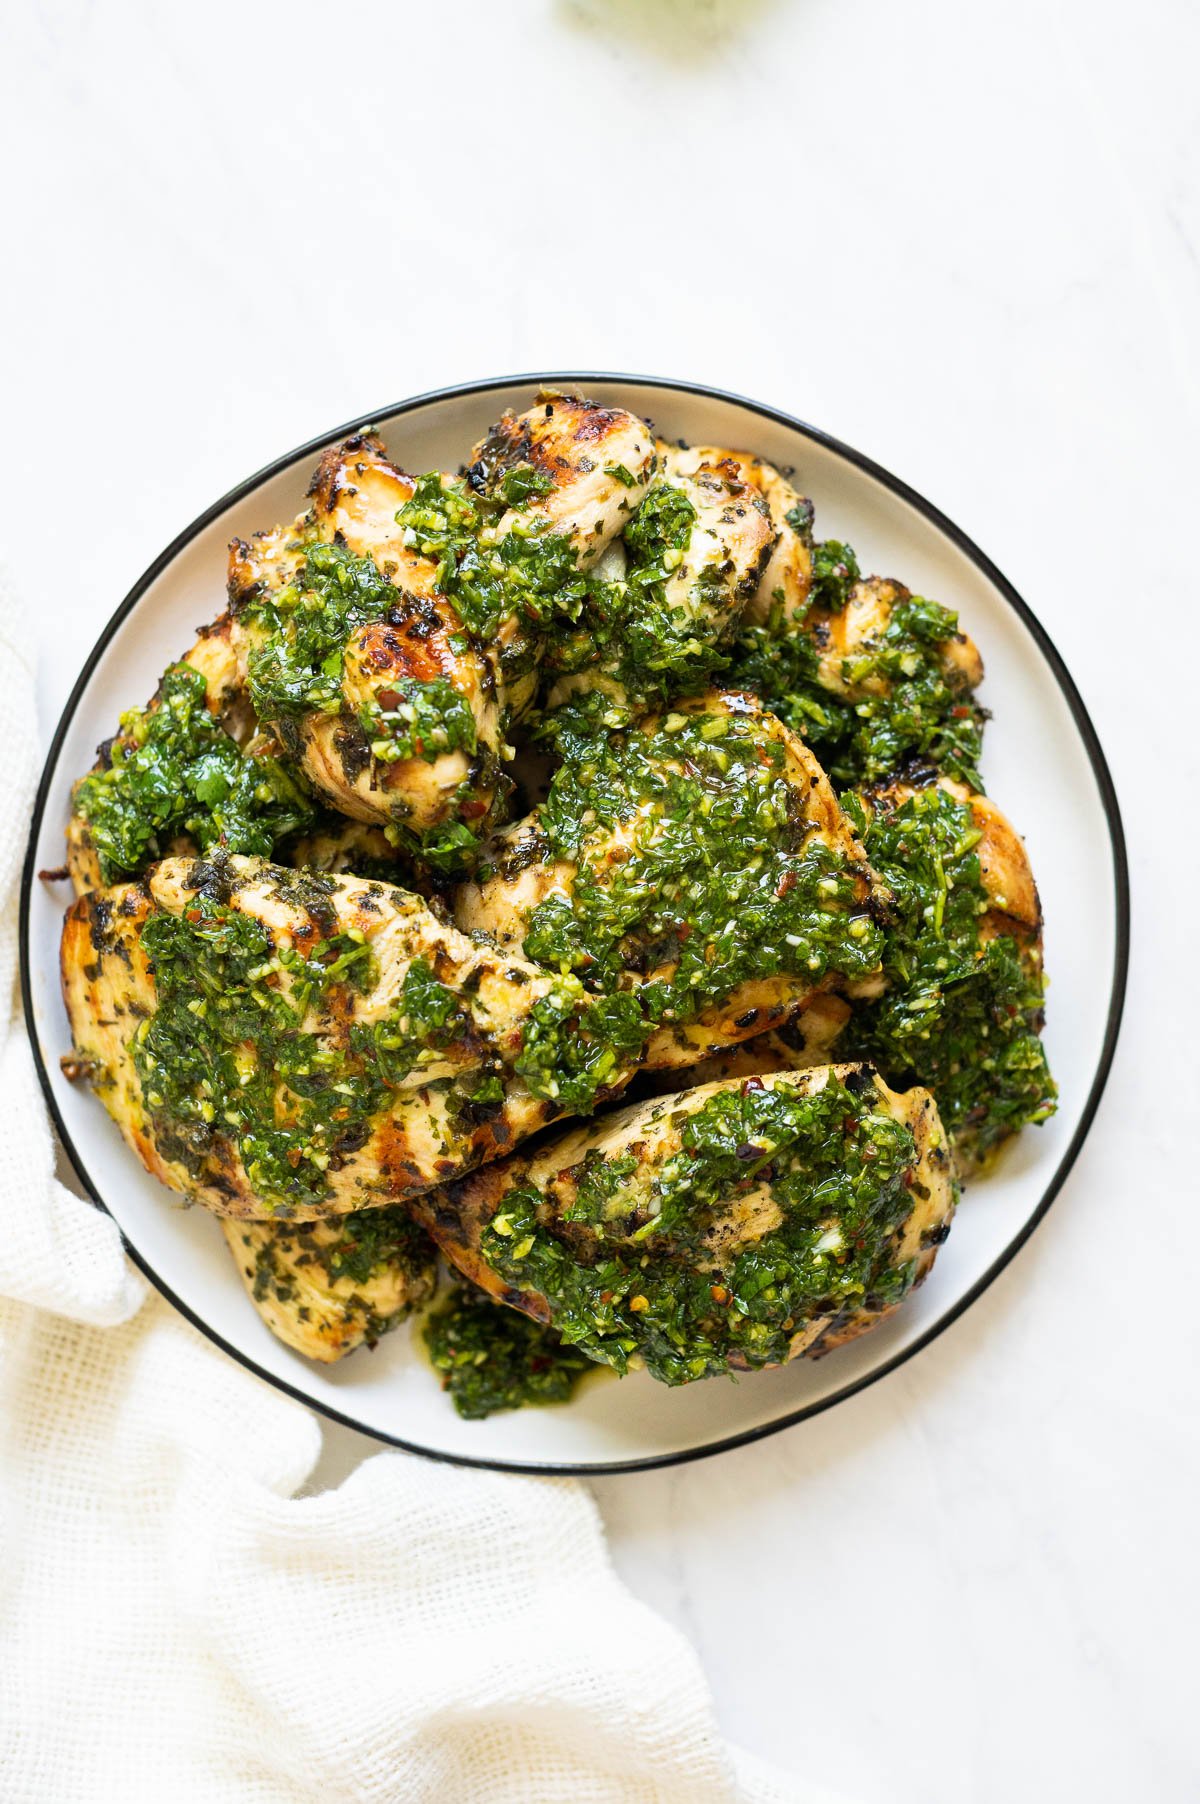 Chimichurri chicken served on a plate and linen napkin nearby.